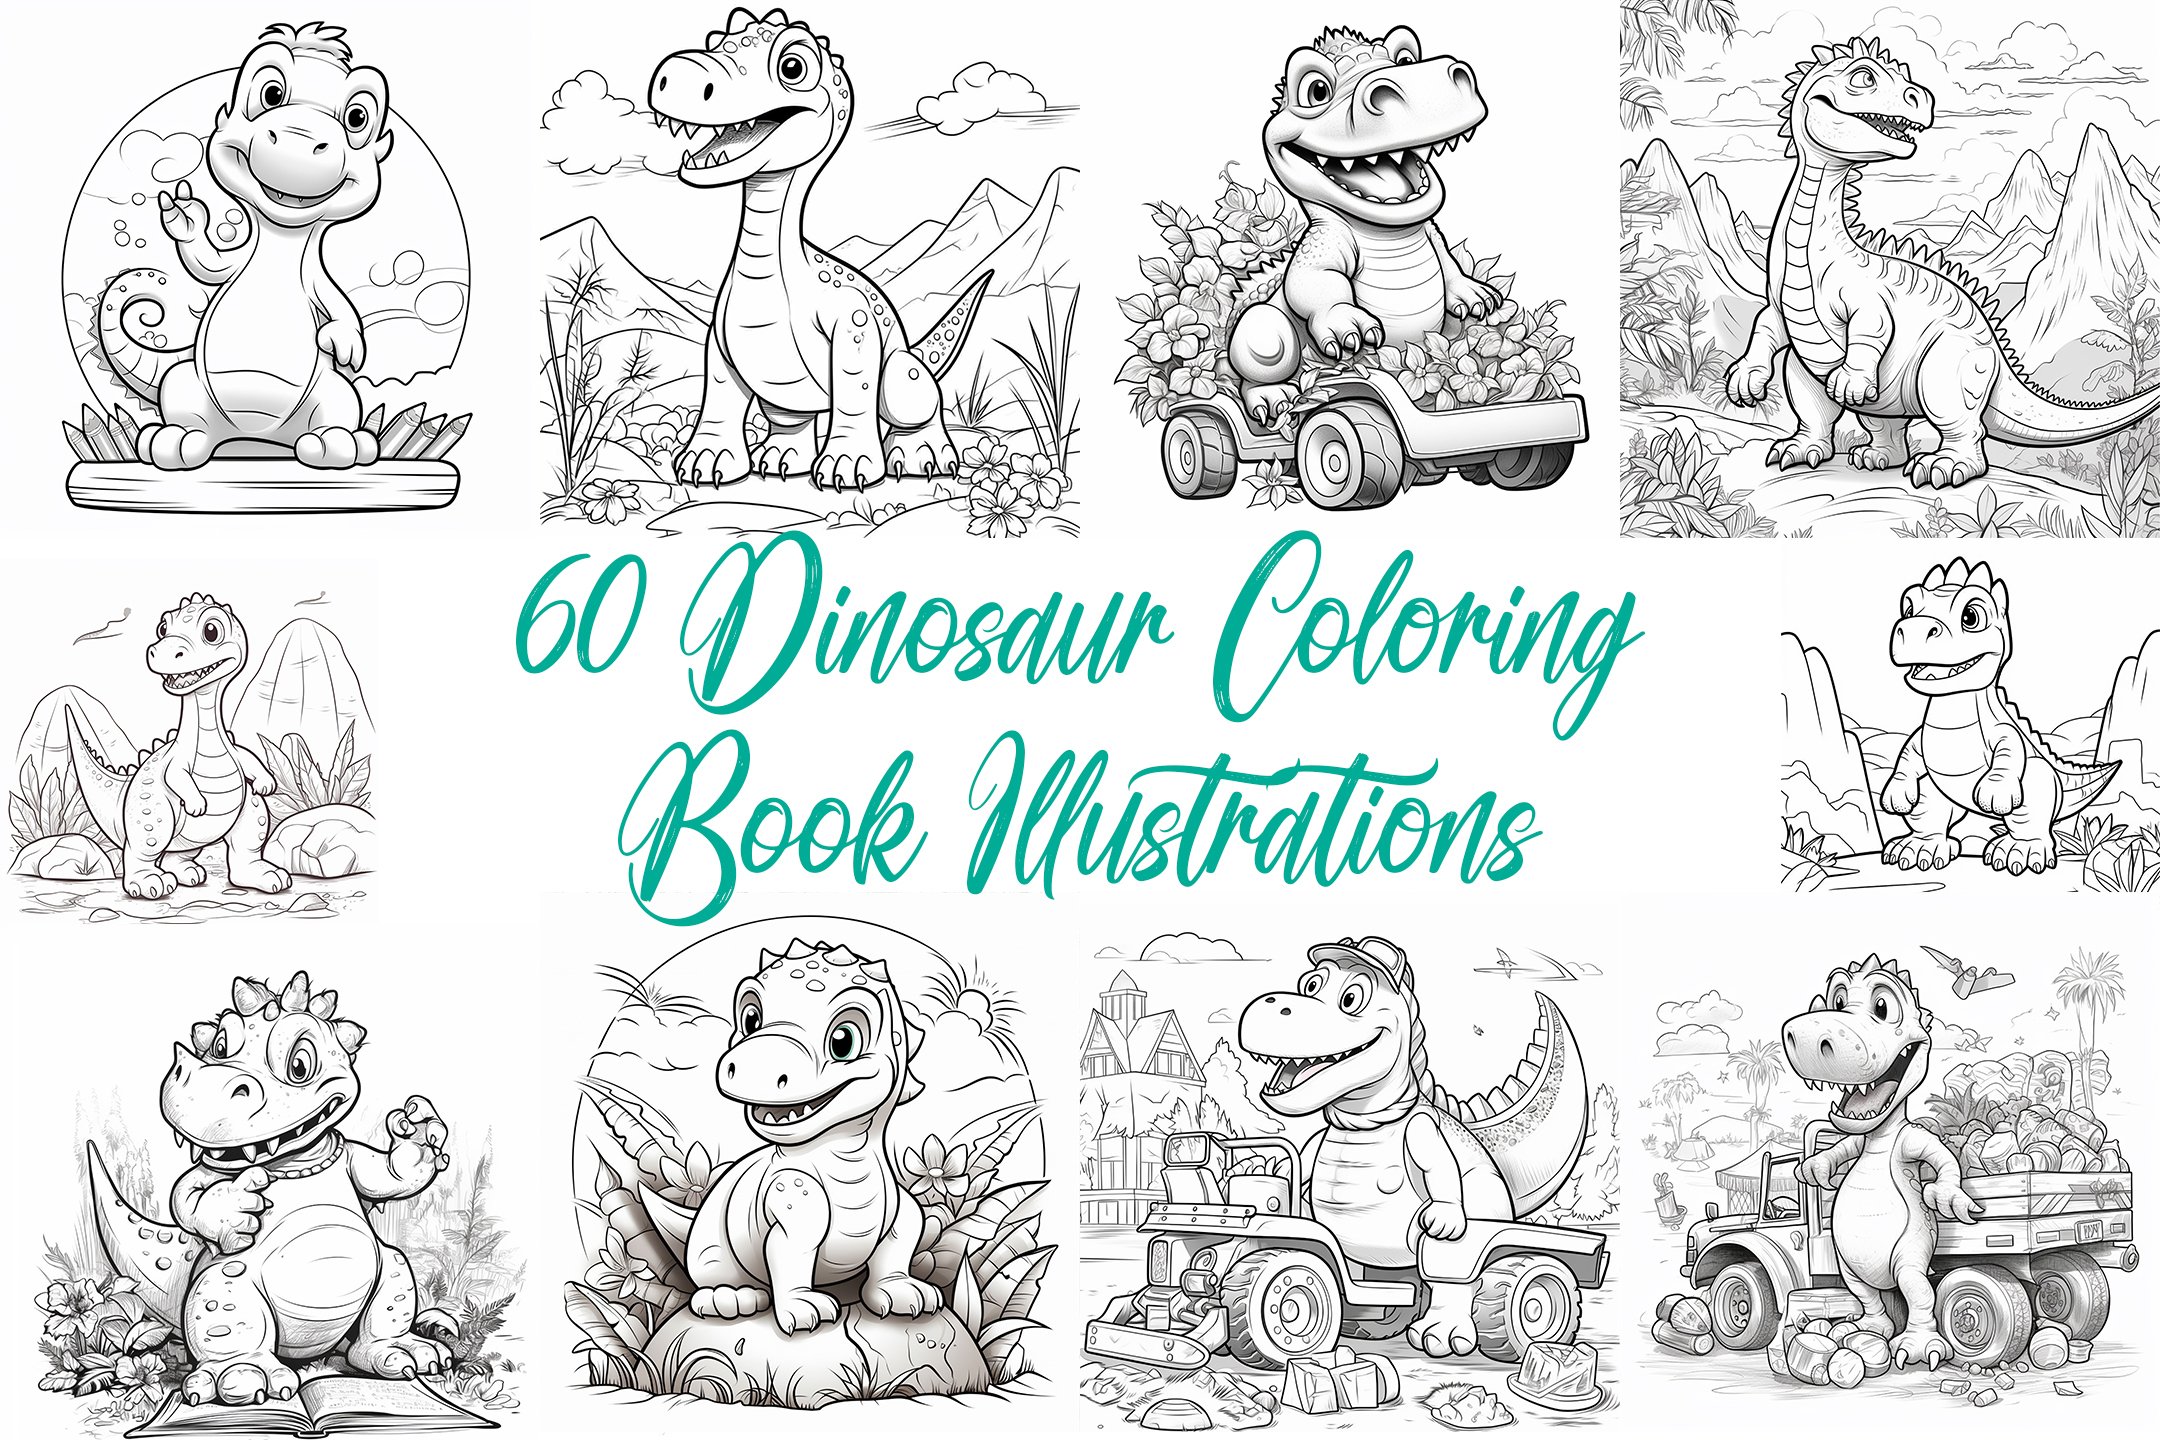 Dinosaur coloring pages book illustrations printable jpg